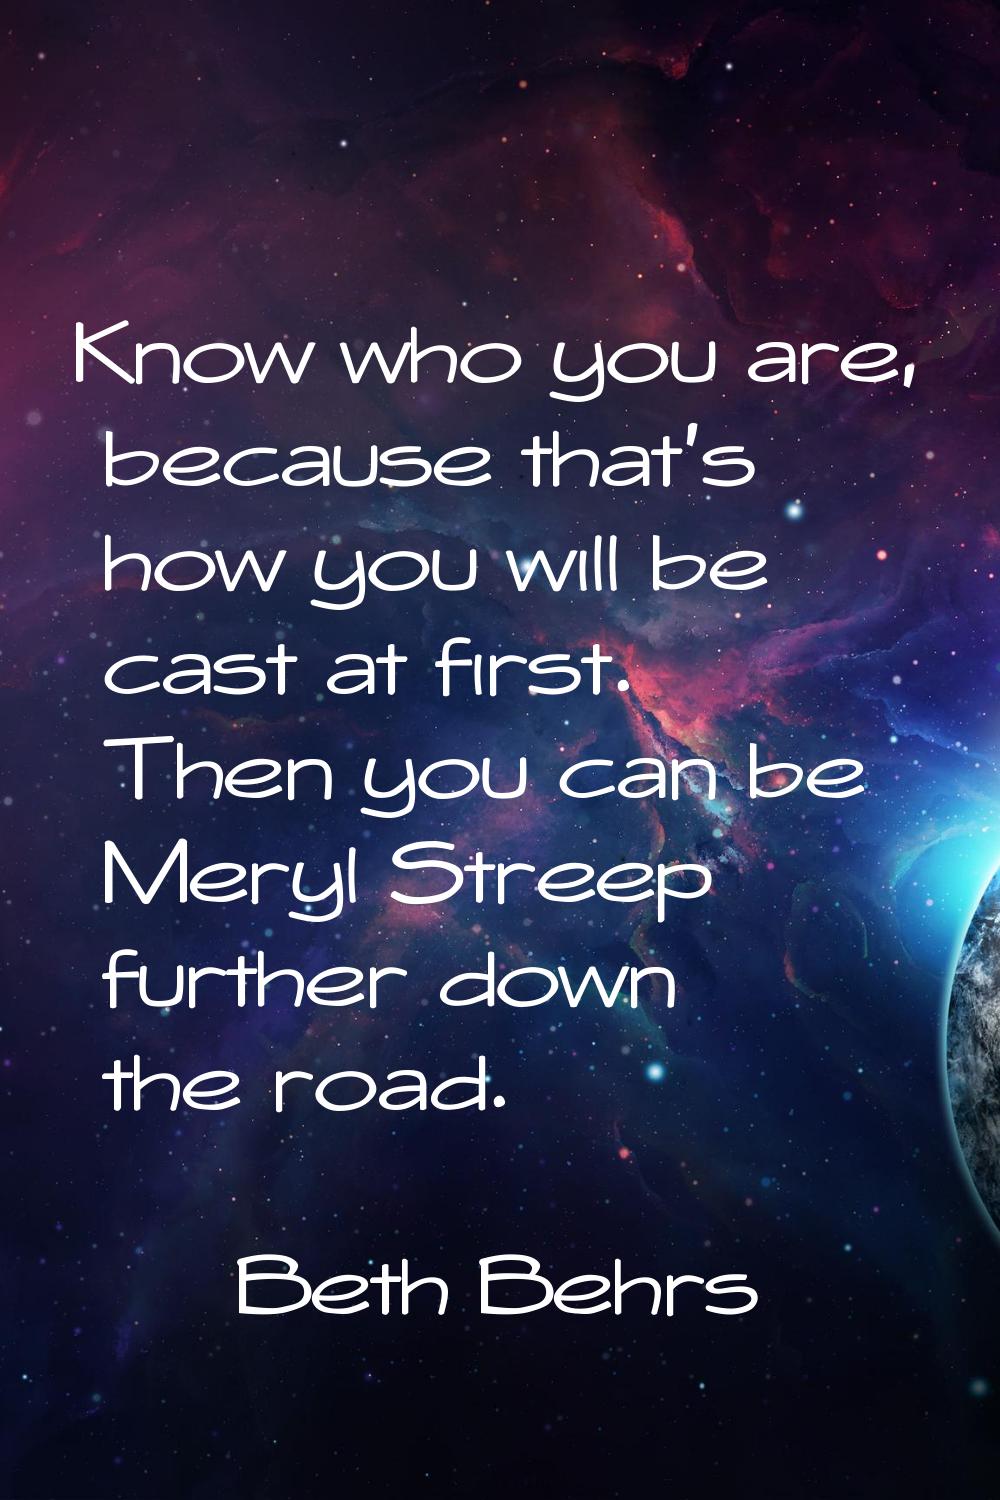 Know who you are, because that's how you will be cast at first. Then you can be Meryl Streep furthe